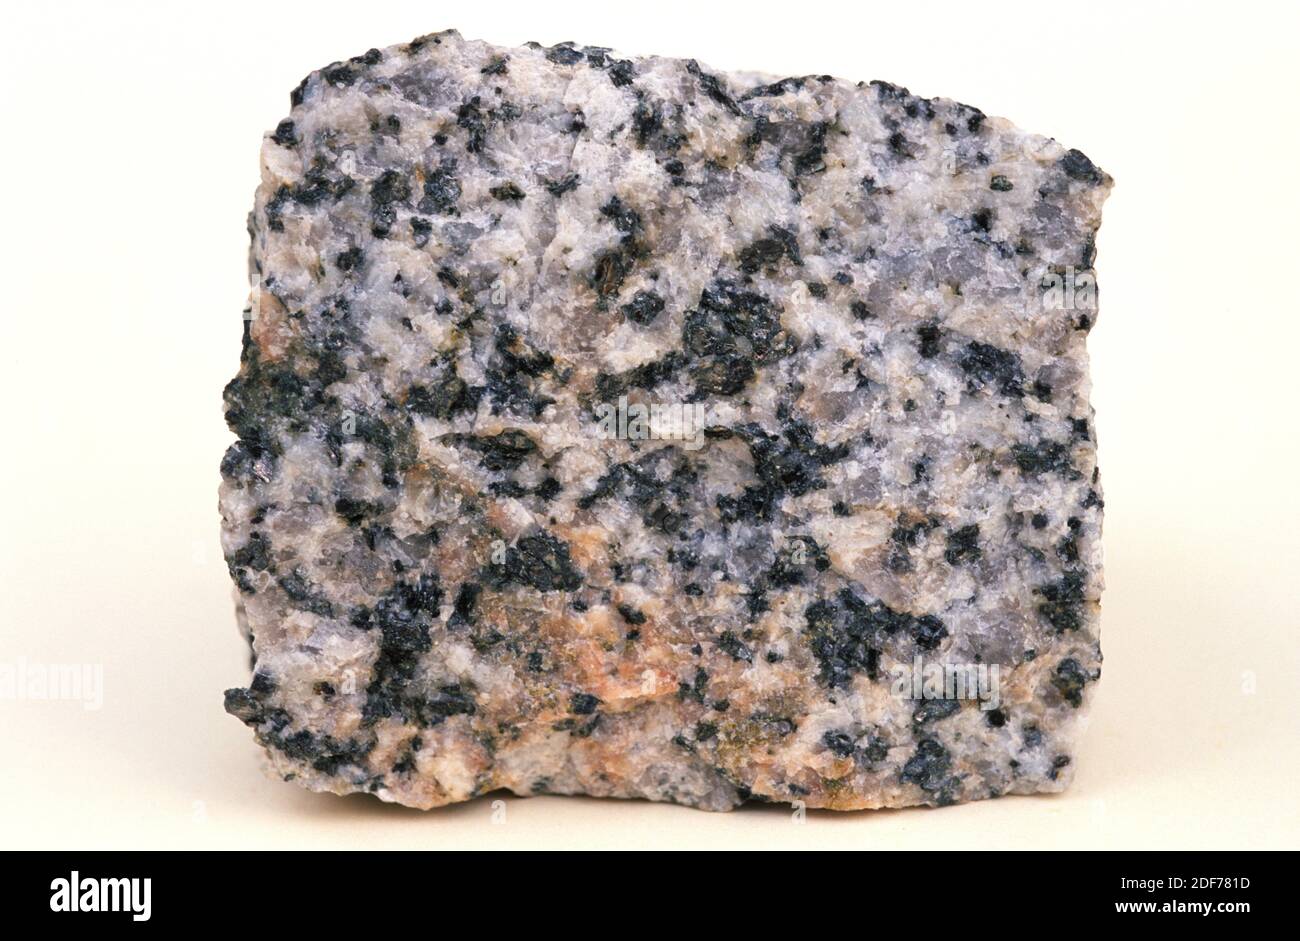 Granite is an igneous intrusive rock with holocrystalline texture. Sample. Stock Photo